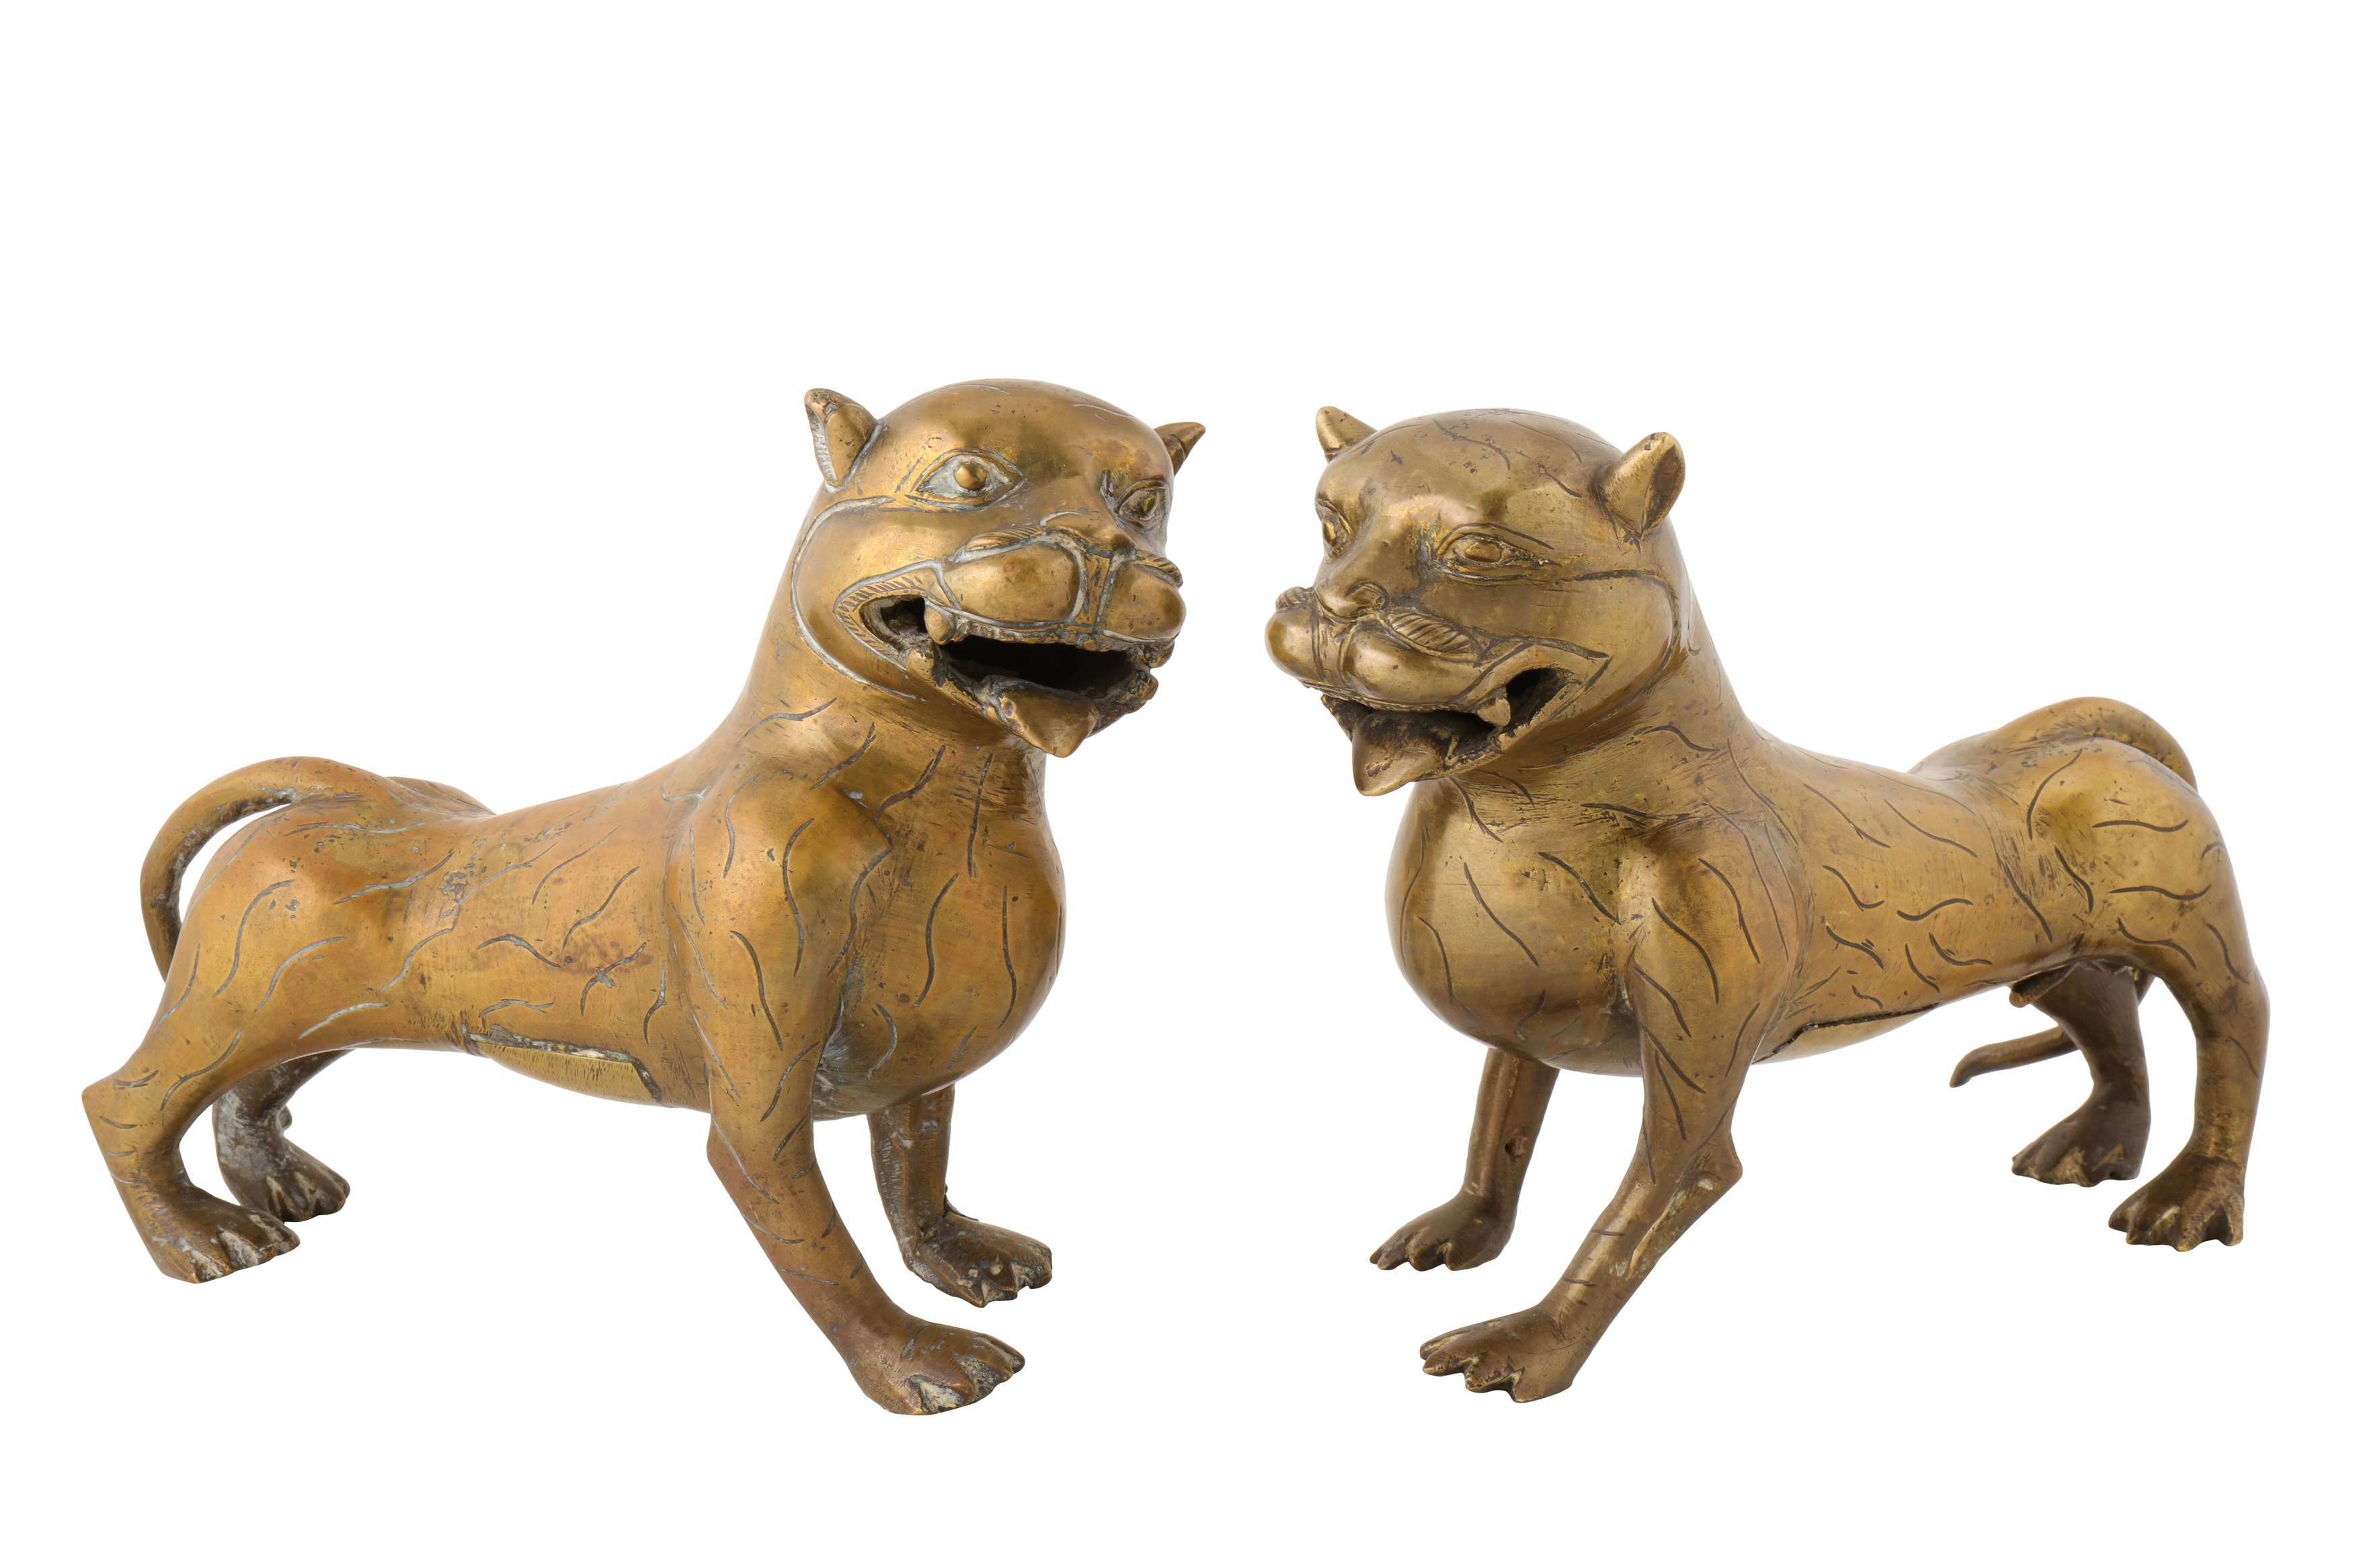 A PAIR OF 18TH CENTURY DECCAN BRONZE MODELS OF TIGERS - Image 2 of 3